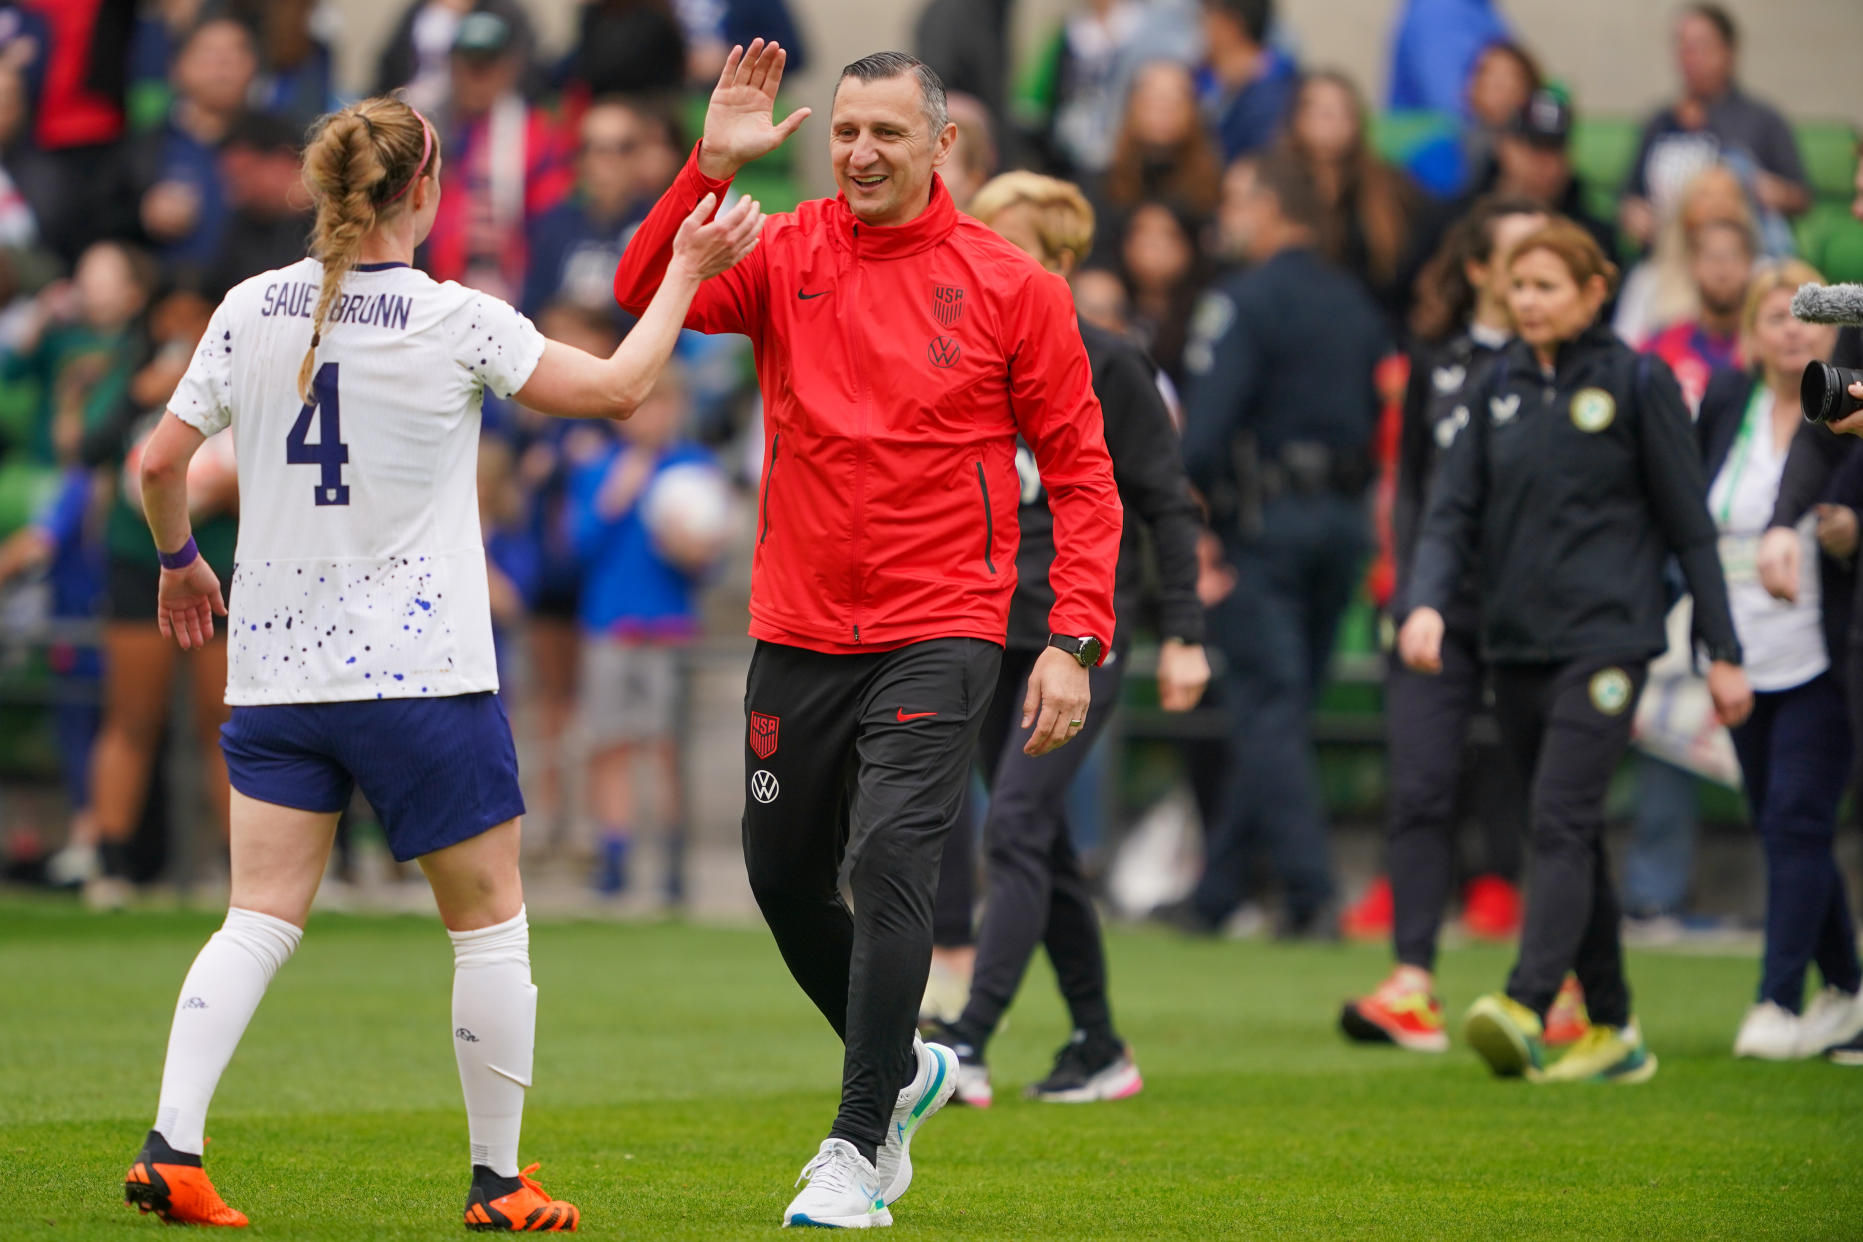 USWNT head coach Vlatko Andonovski high fives Becky Sauerbrunn during a game against Ireland at Q2 Stadium on April 8 in Austin, Texas. (Photo by John Todd/USSF/Getty Images)